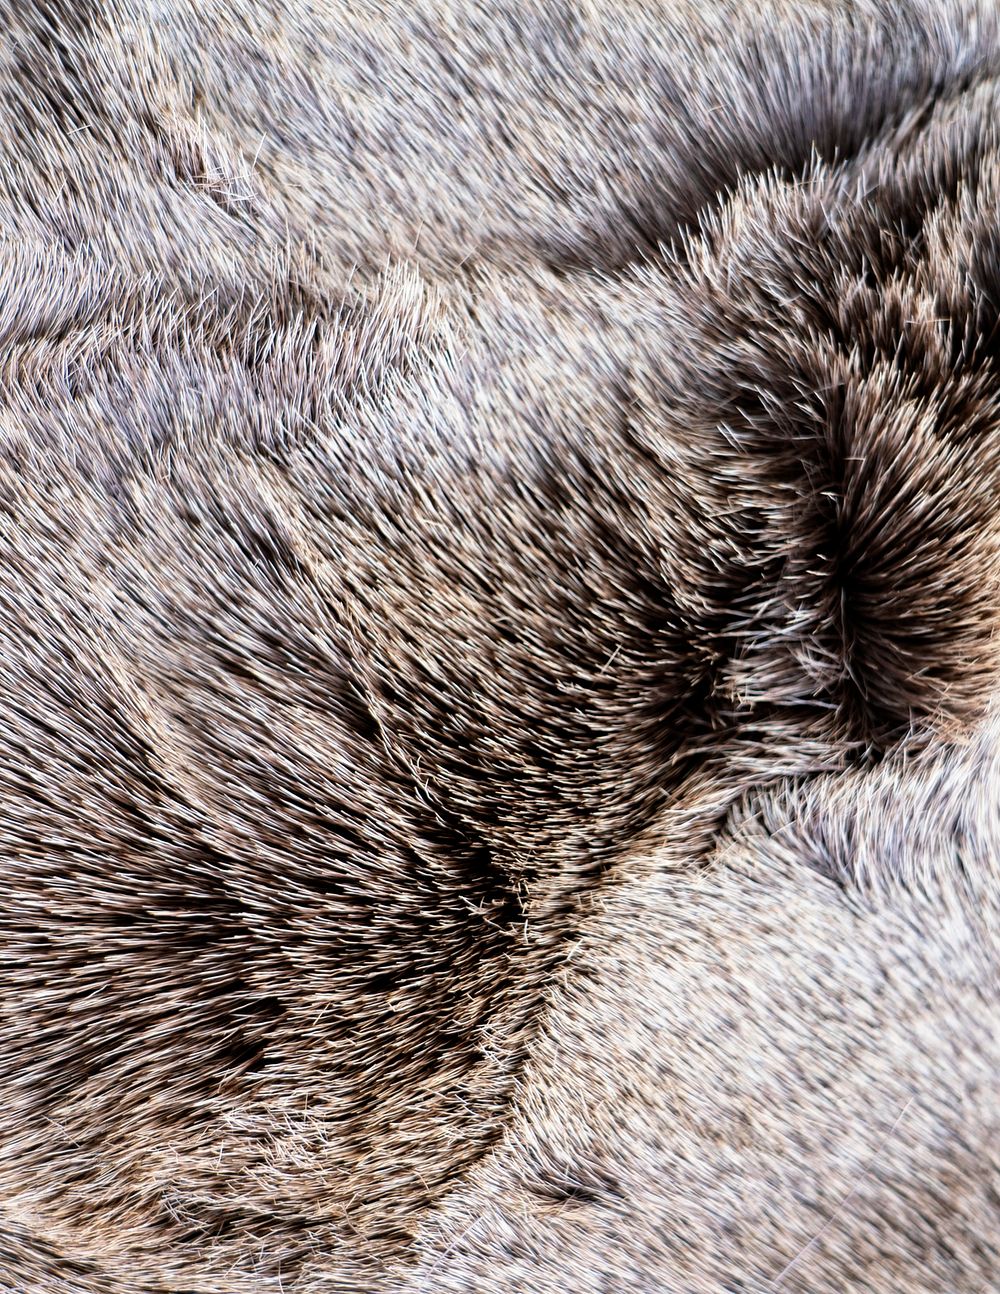 Fluffy animal fur texture, close up background